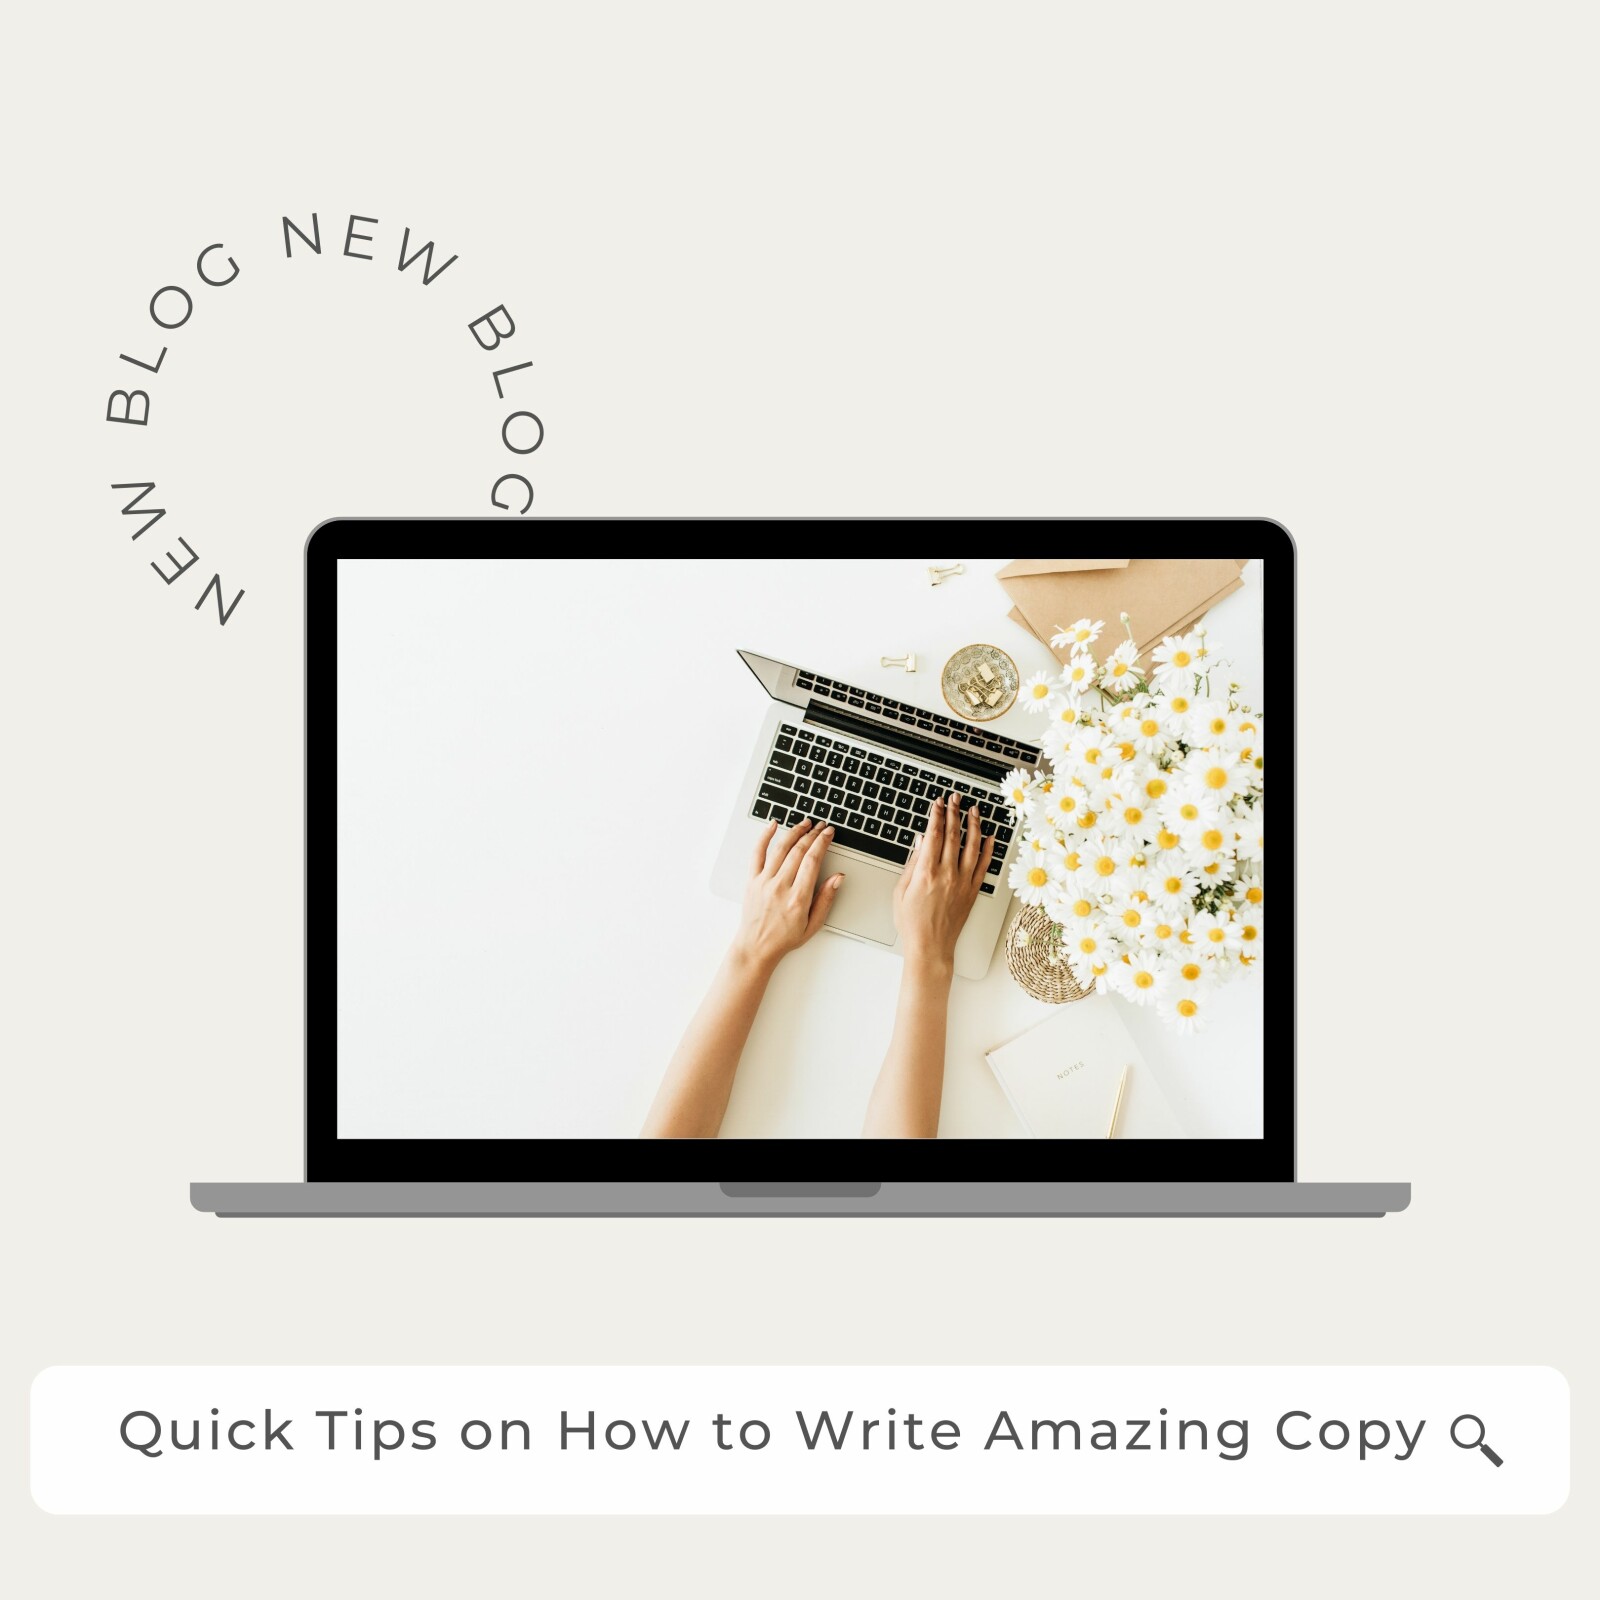 Quick Tips on How to Write Amazing Copy